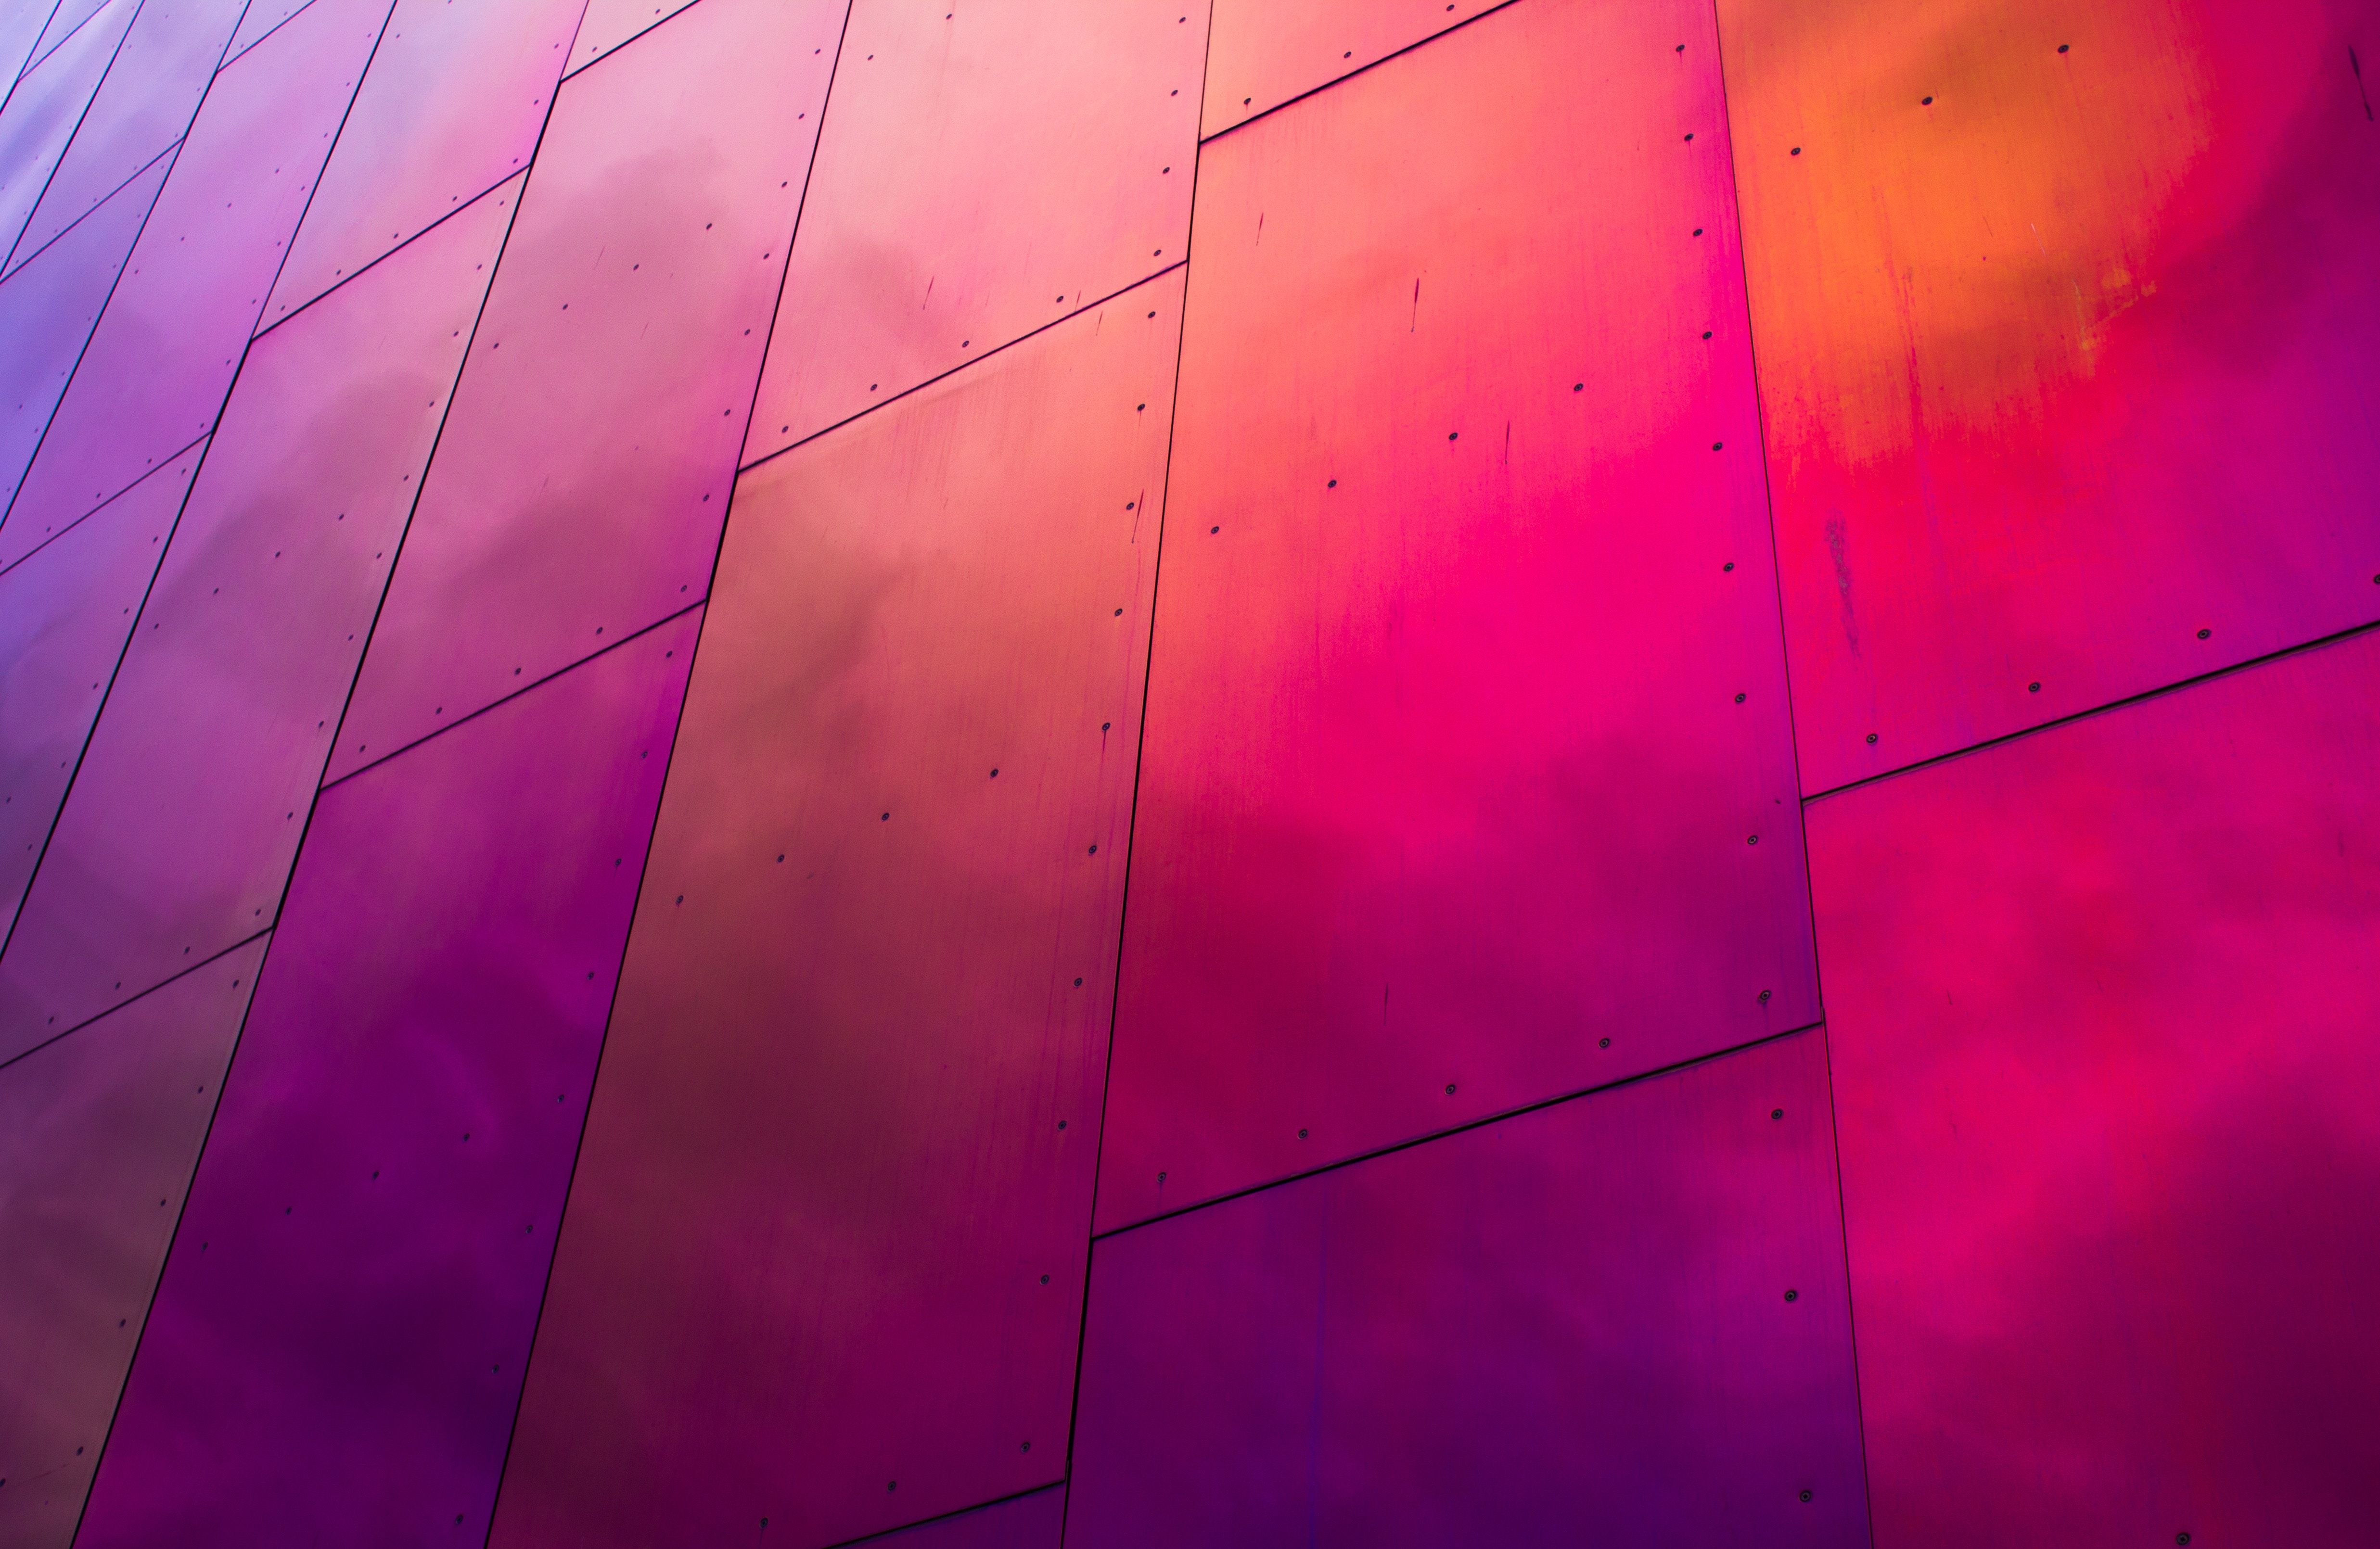 4946x3220 #metal, #color, #structure, #metallic, #shape, #geometric, #pink, #perspective wallpaper, #pattern, #wall, #architecture, #PNG image, #symmetry, #vibrant, #colour, #texture, #surface, #textured, #rectangle, #building, #blue. Mocah